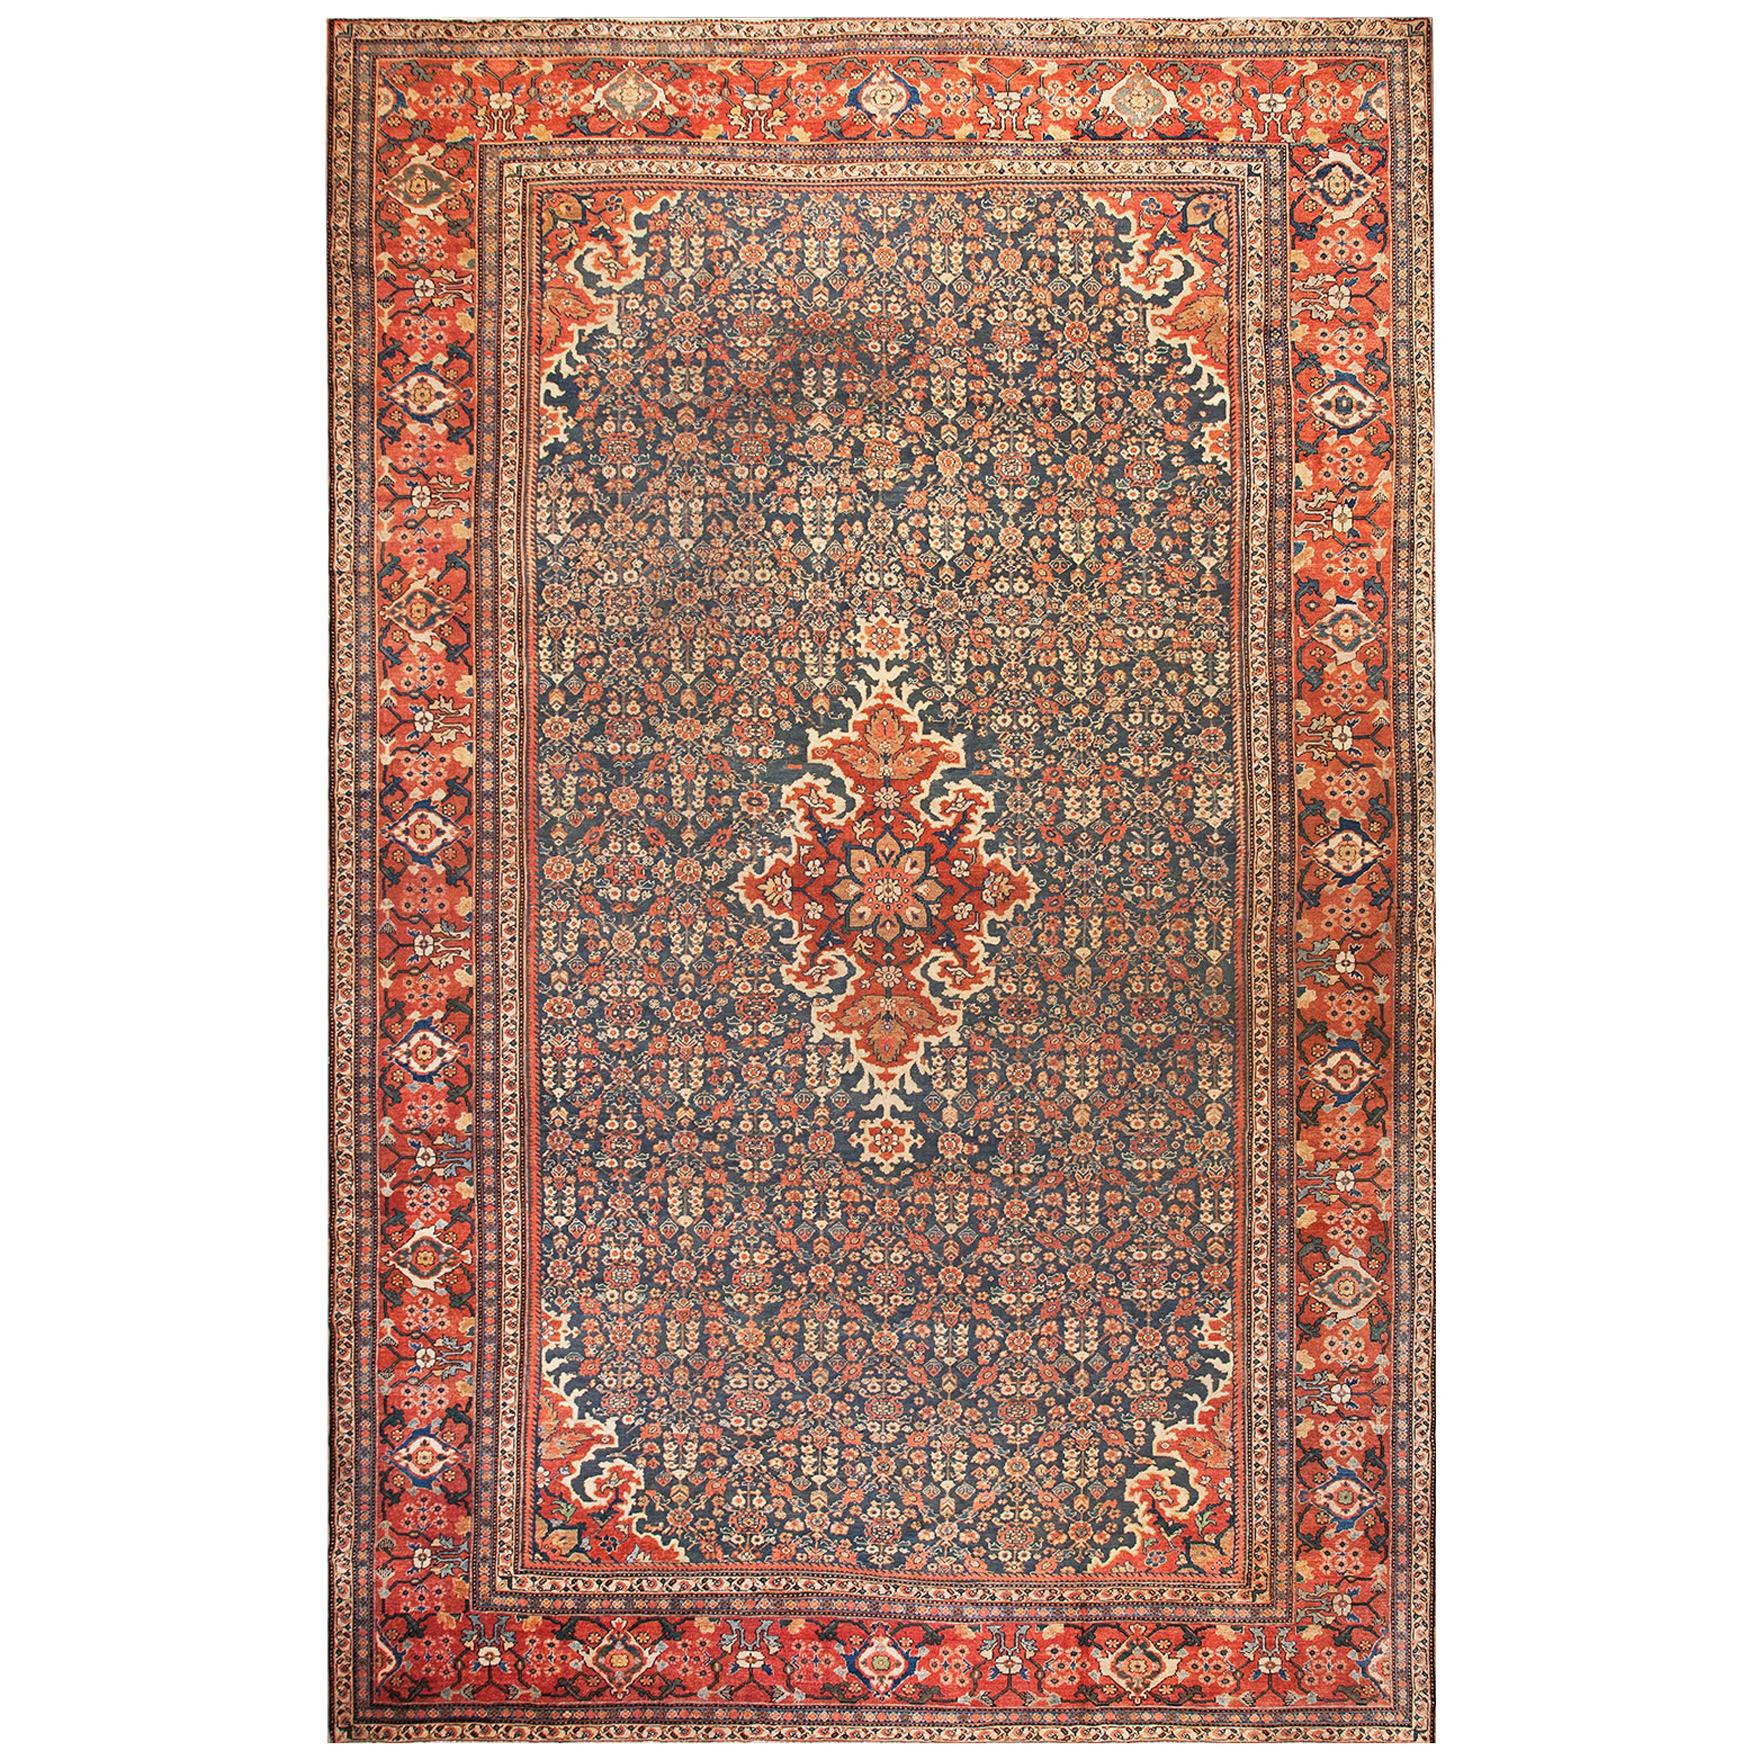 Early 20th Century Persian Sultanabad Carpet ( 11'7" x 18'7" - 355 x 565 ) For Sale